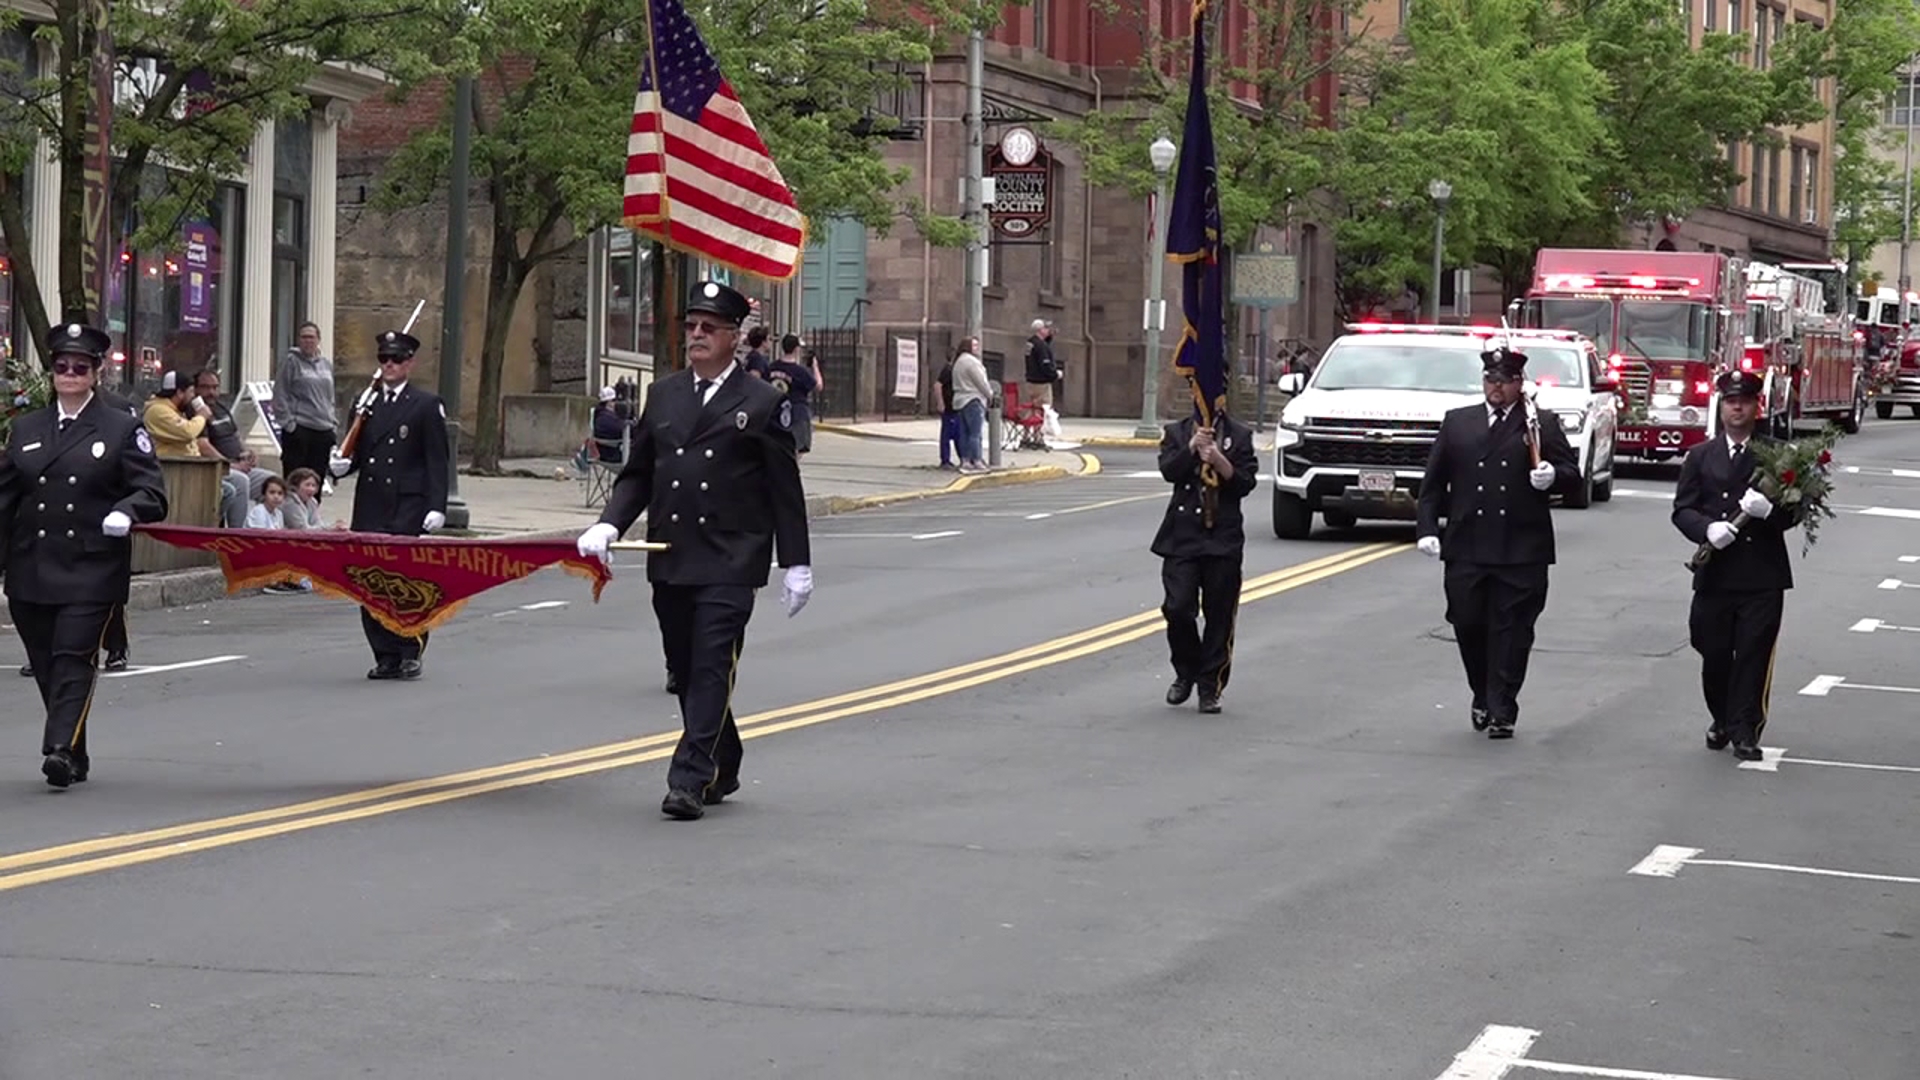 Folks came together Saturday for the 70th annual Schuylkill County Volunteer Firefighters Convention Parade.